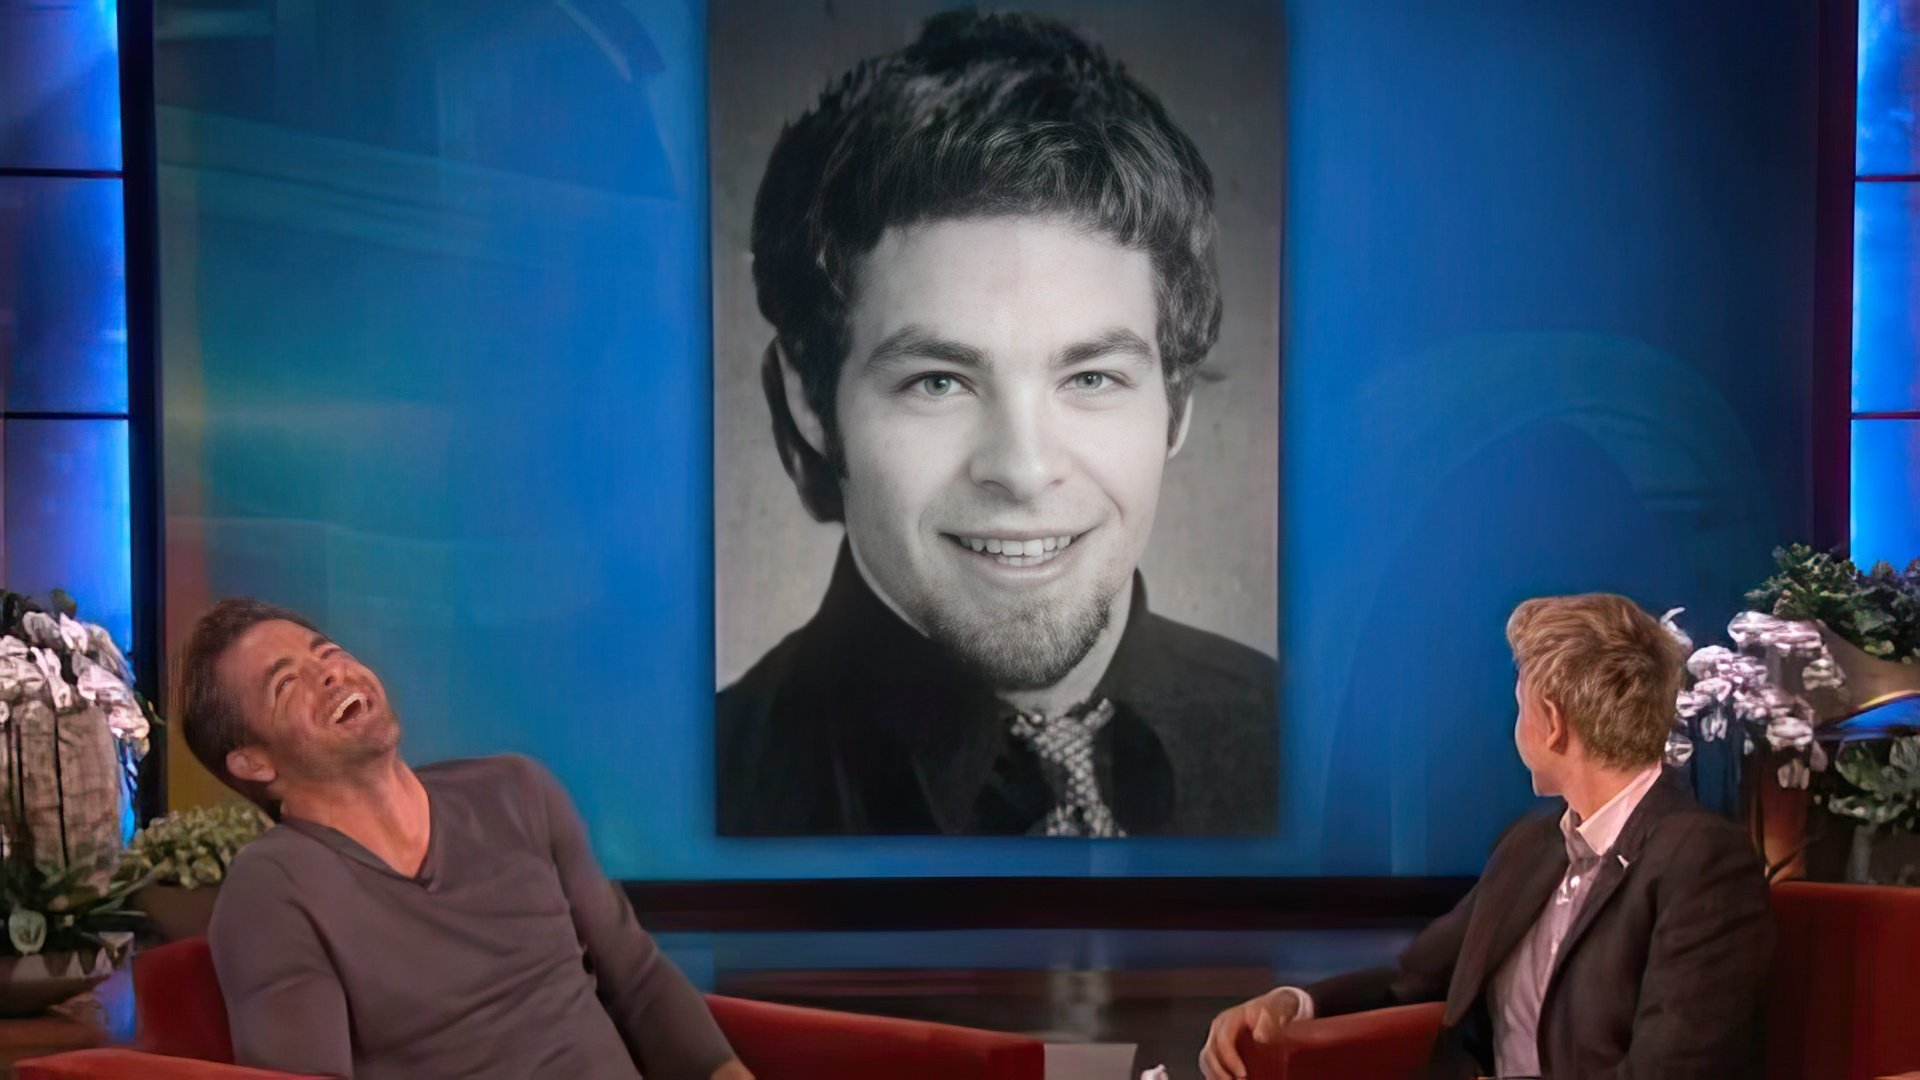 Chris Pine considered himself to be an ugly duckling as a child